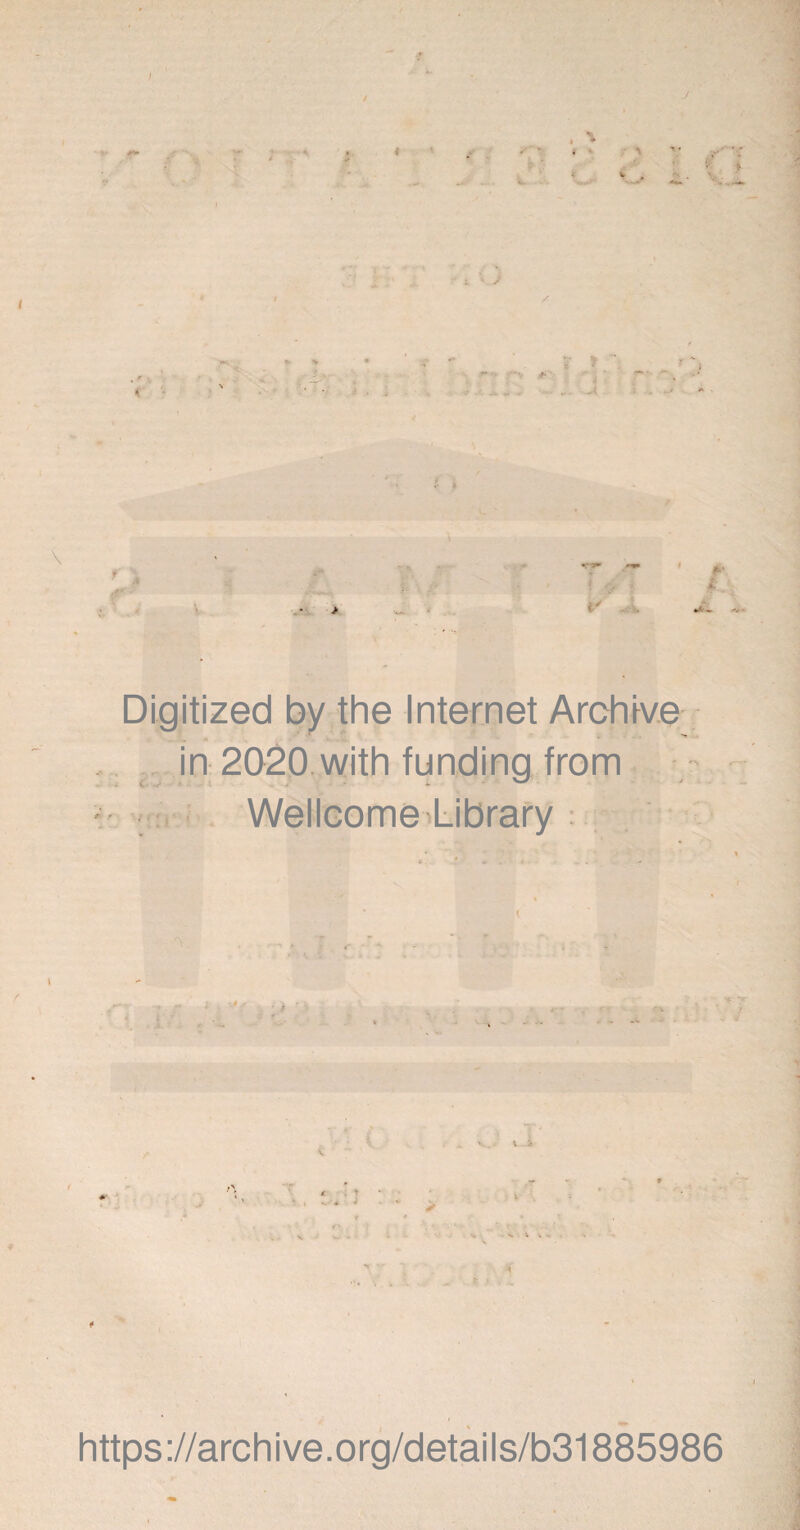 Digitized by the Internet Archive . in 2020, with funding from - • WellGome>Library : , ■ J *4- ' '• i 4 / / 1 ^ A S'.-. https://archive.org/details/b31885986